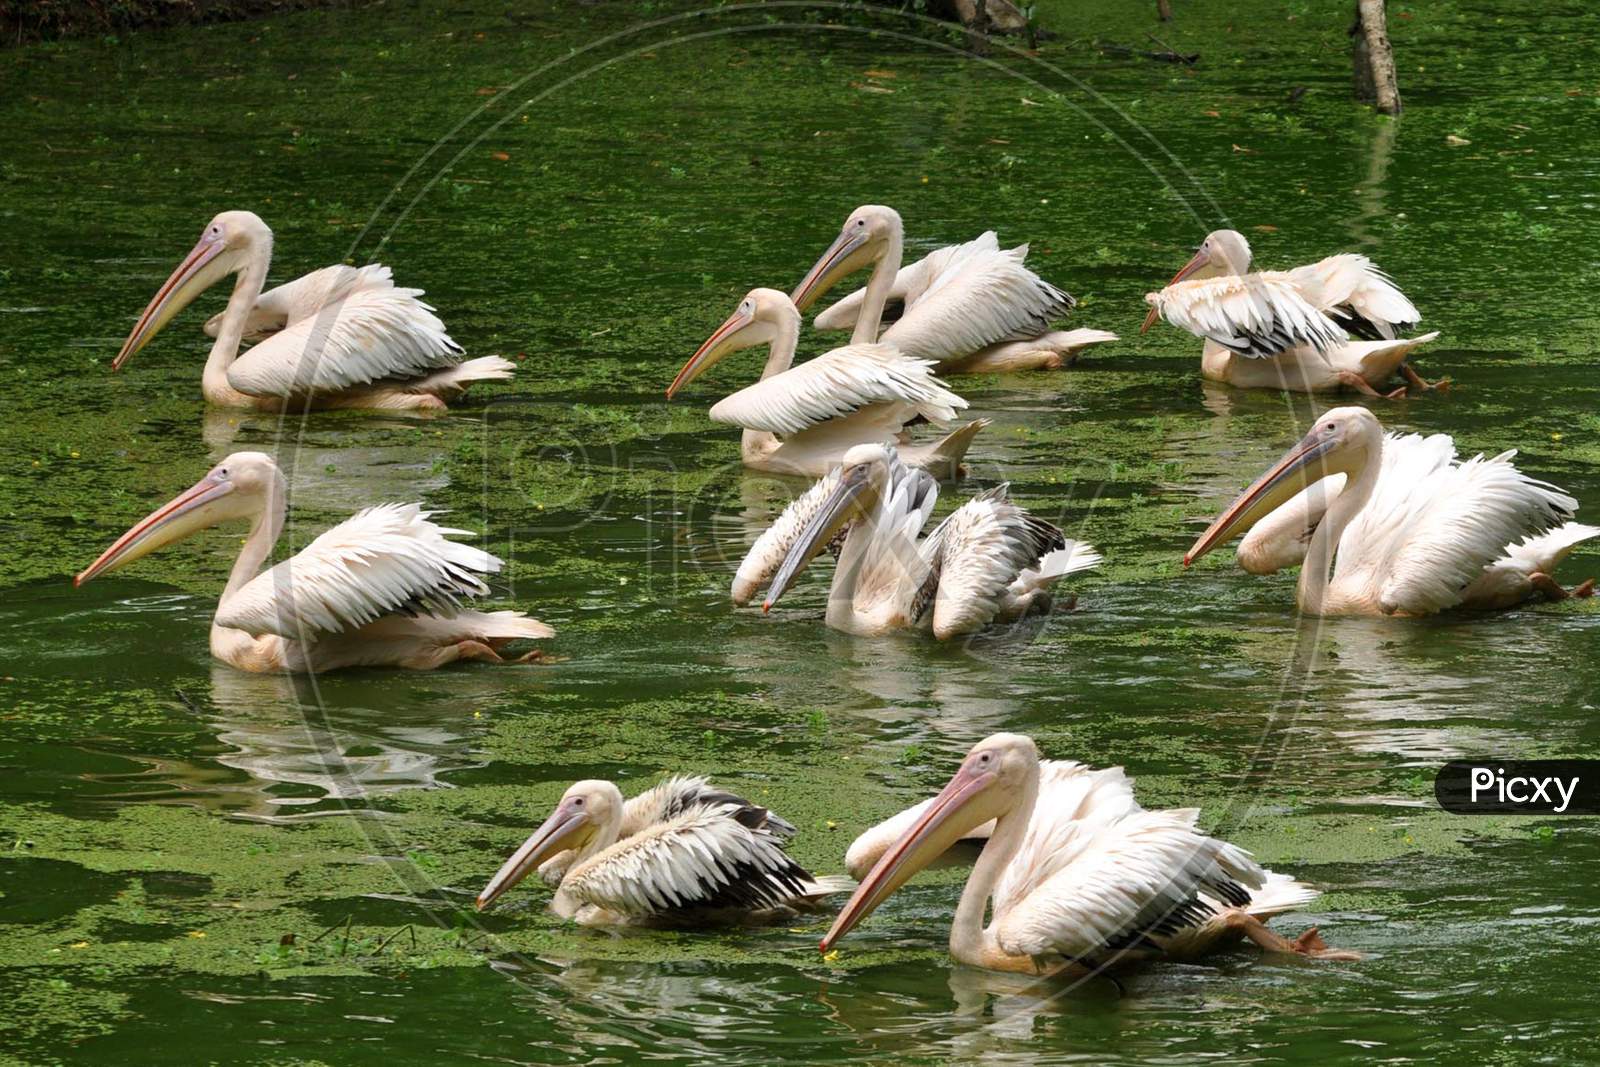 A Group Of Rosy Pelican Try To Catch Fish In Enclosure At Assam State Zoo Cum Botanical Garden In Guwahati On Wednesday 10 June 2020